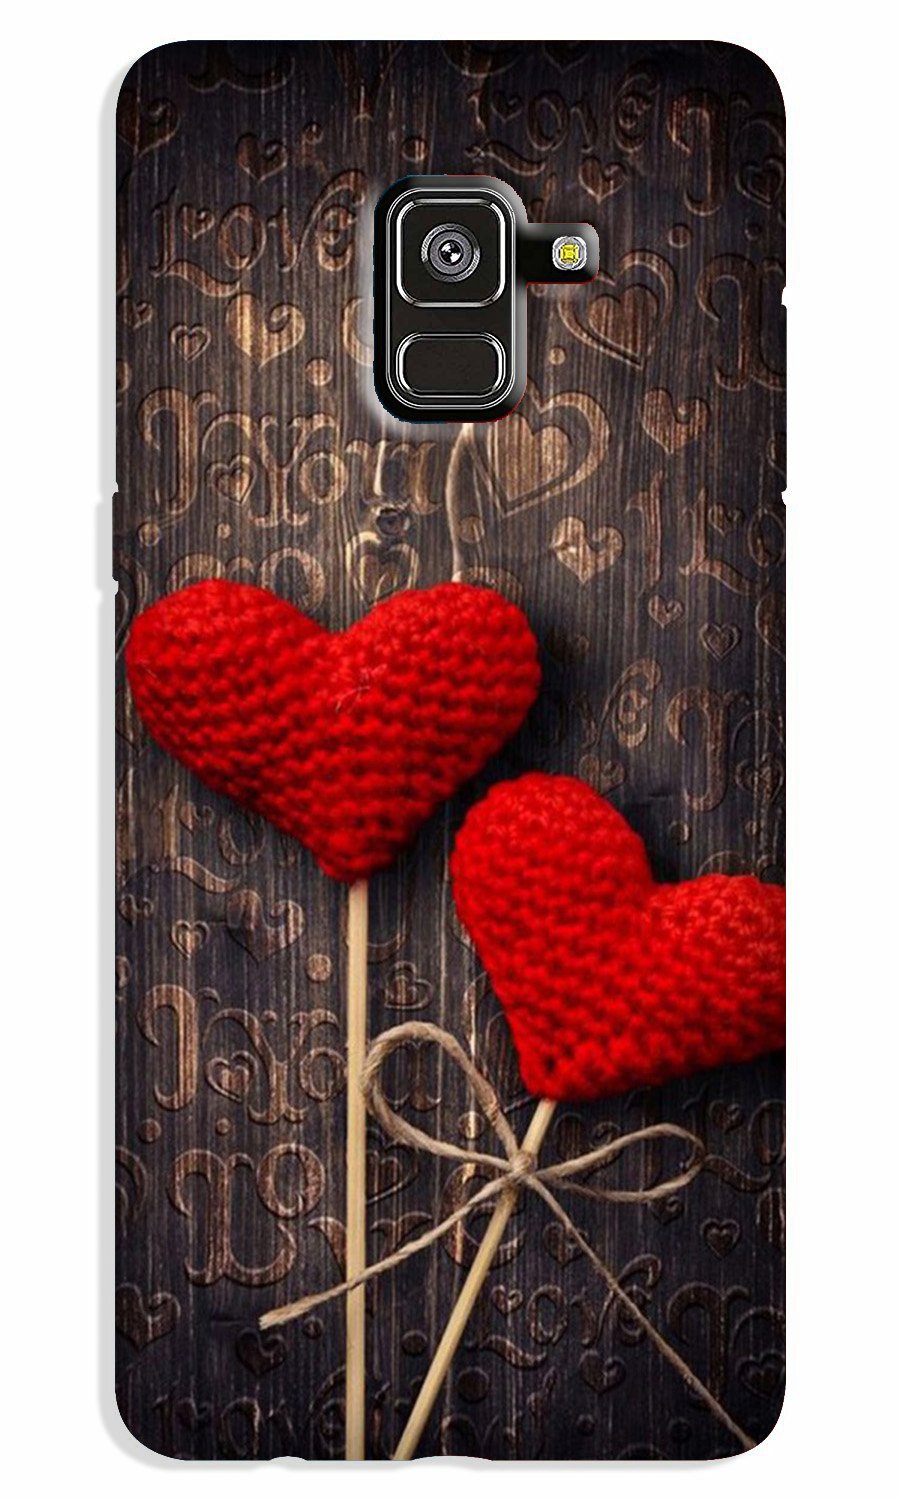 Red Hearts Case for Galaxy A8 Plus